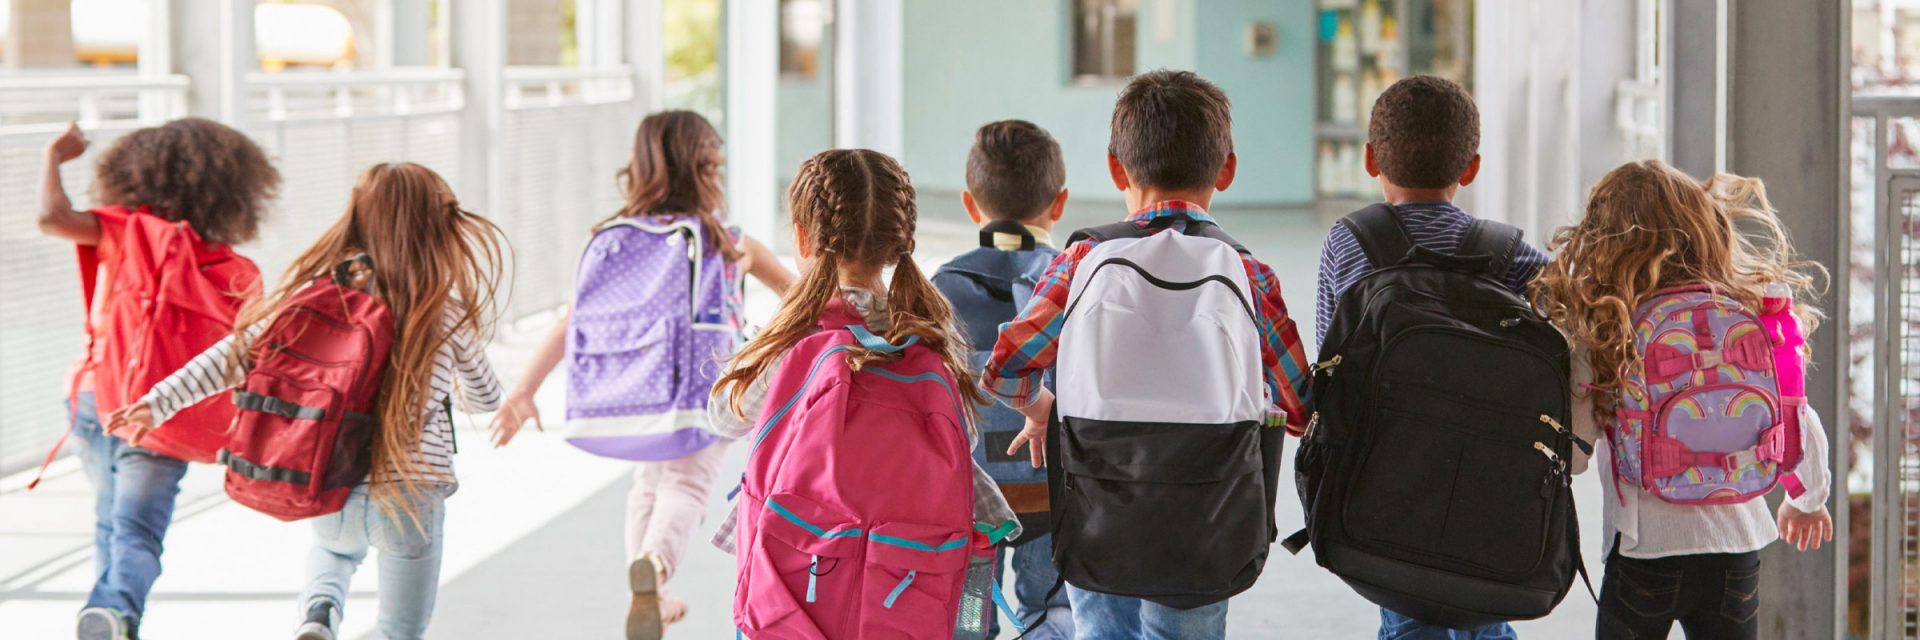 group of school children with backpacks